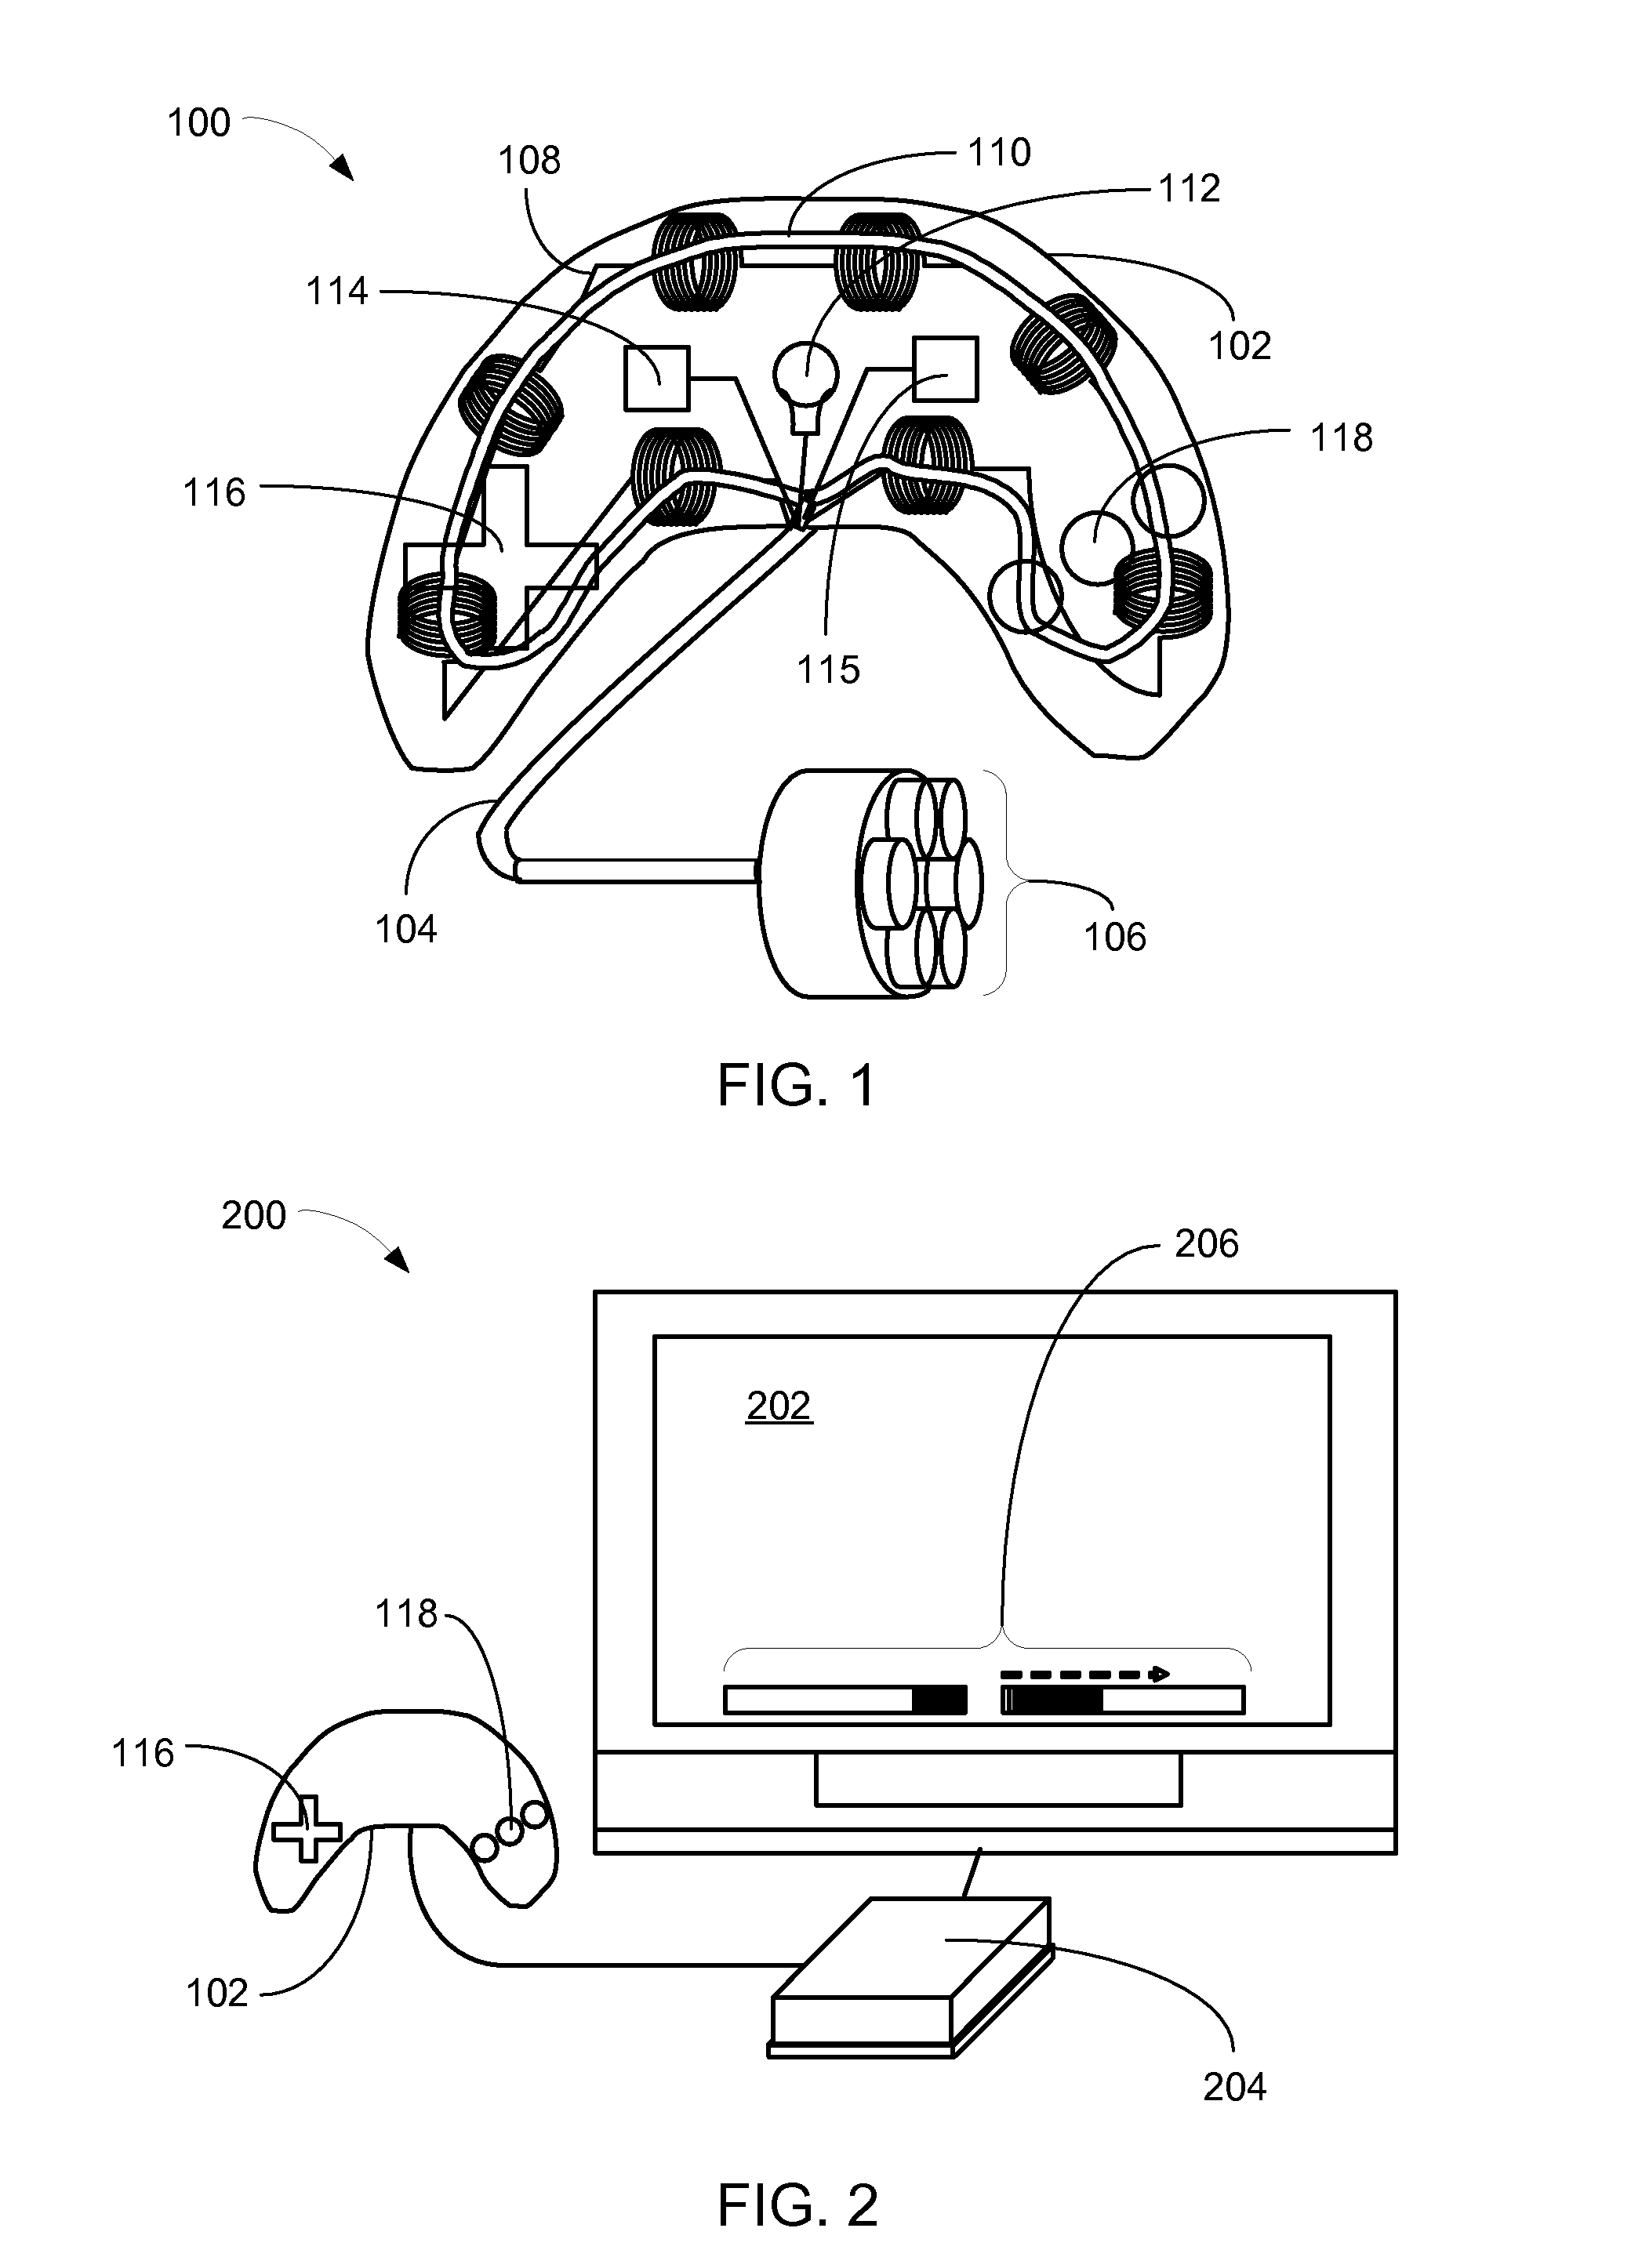 Haptic interface system for video systems